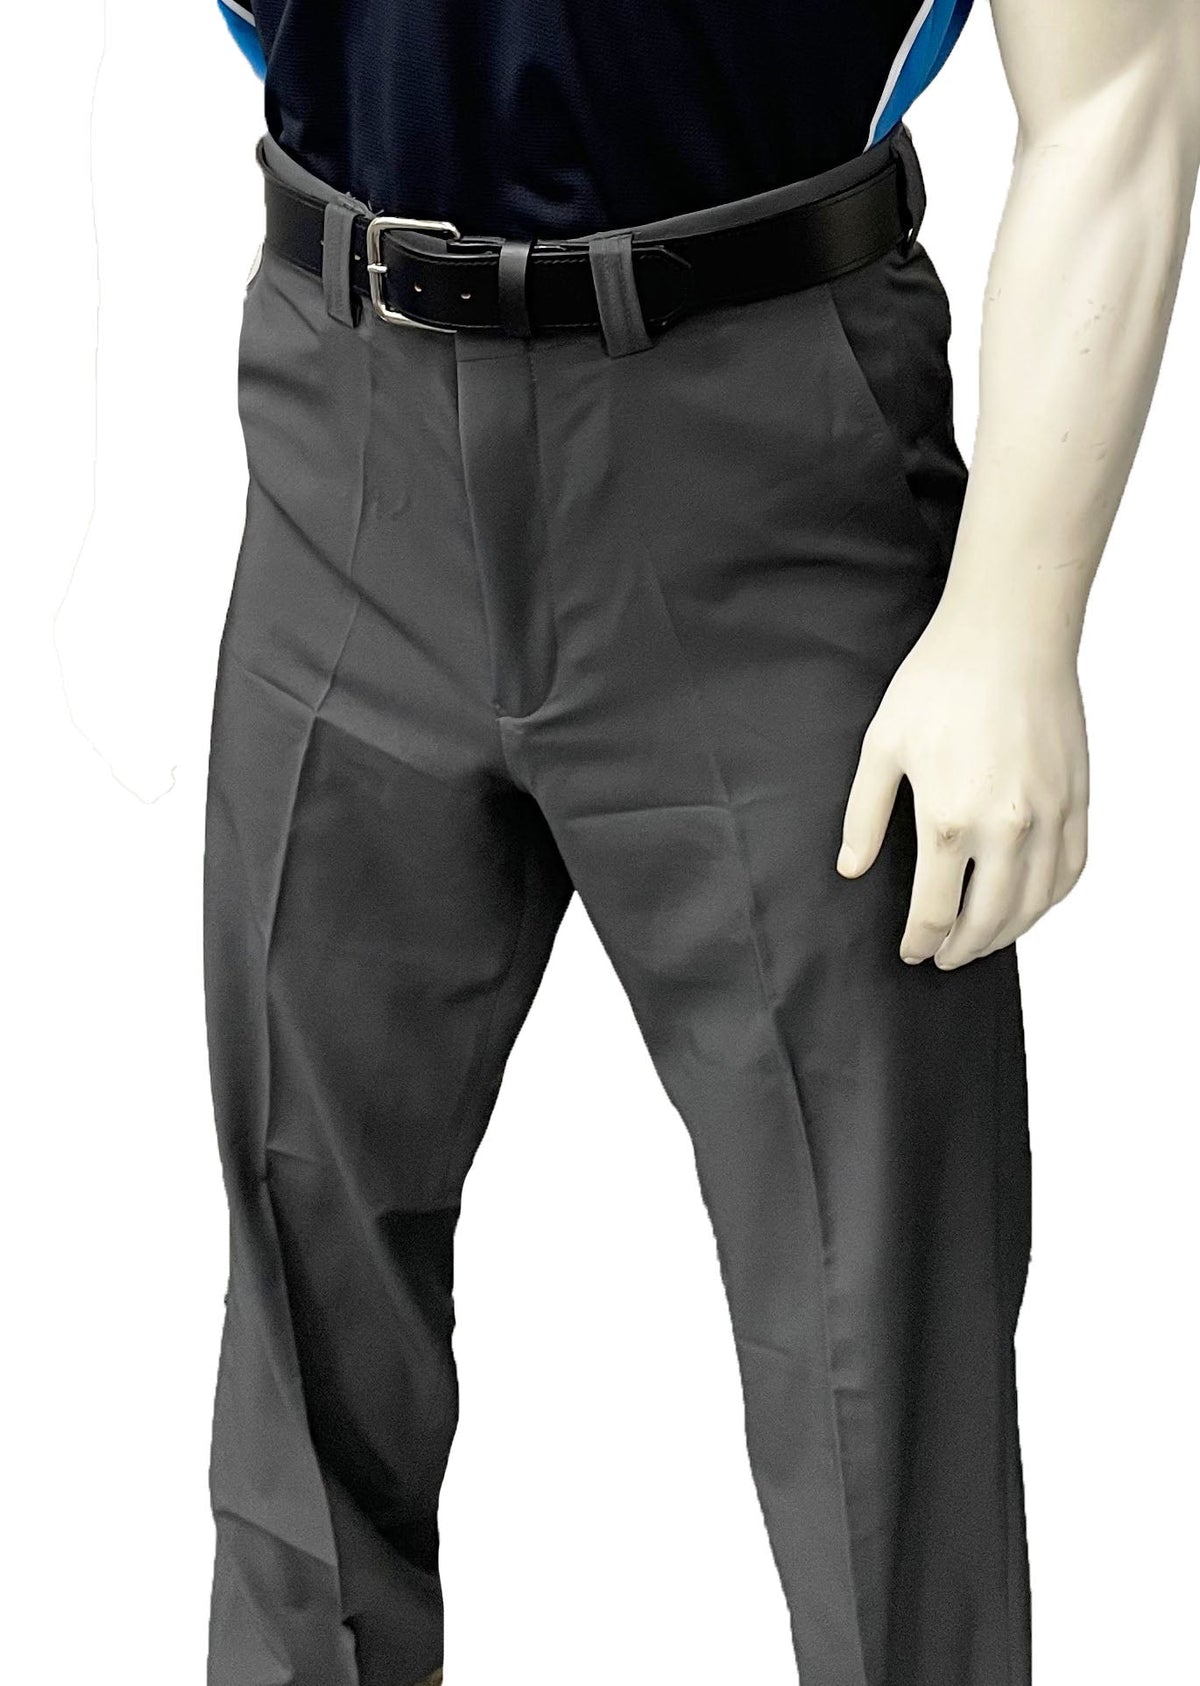 Smitty | BBS-354 | 4-Way Stretch Flat Front Combo Umpire Pants | Charcoal Grey